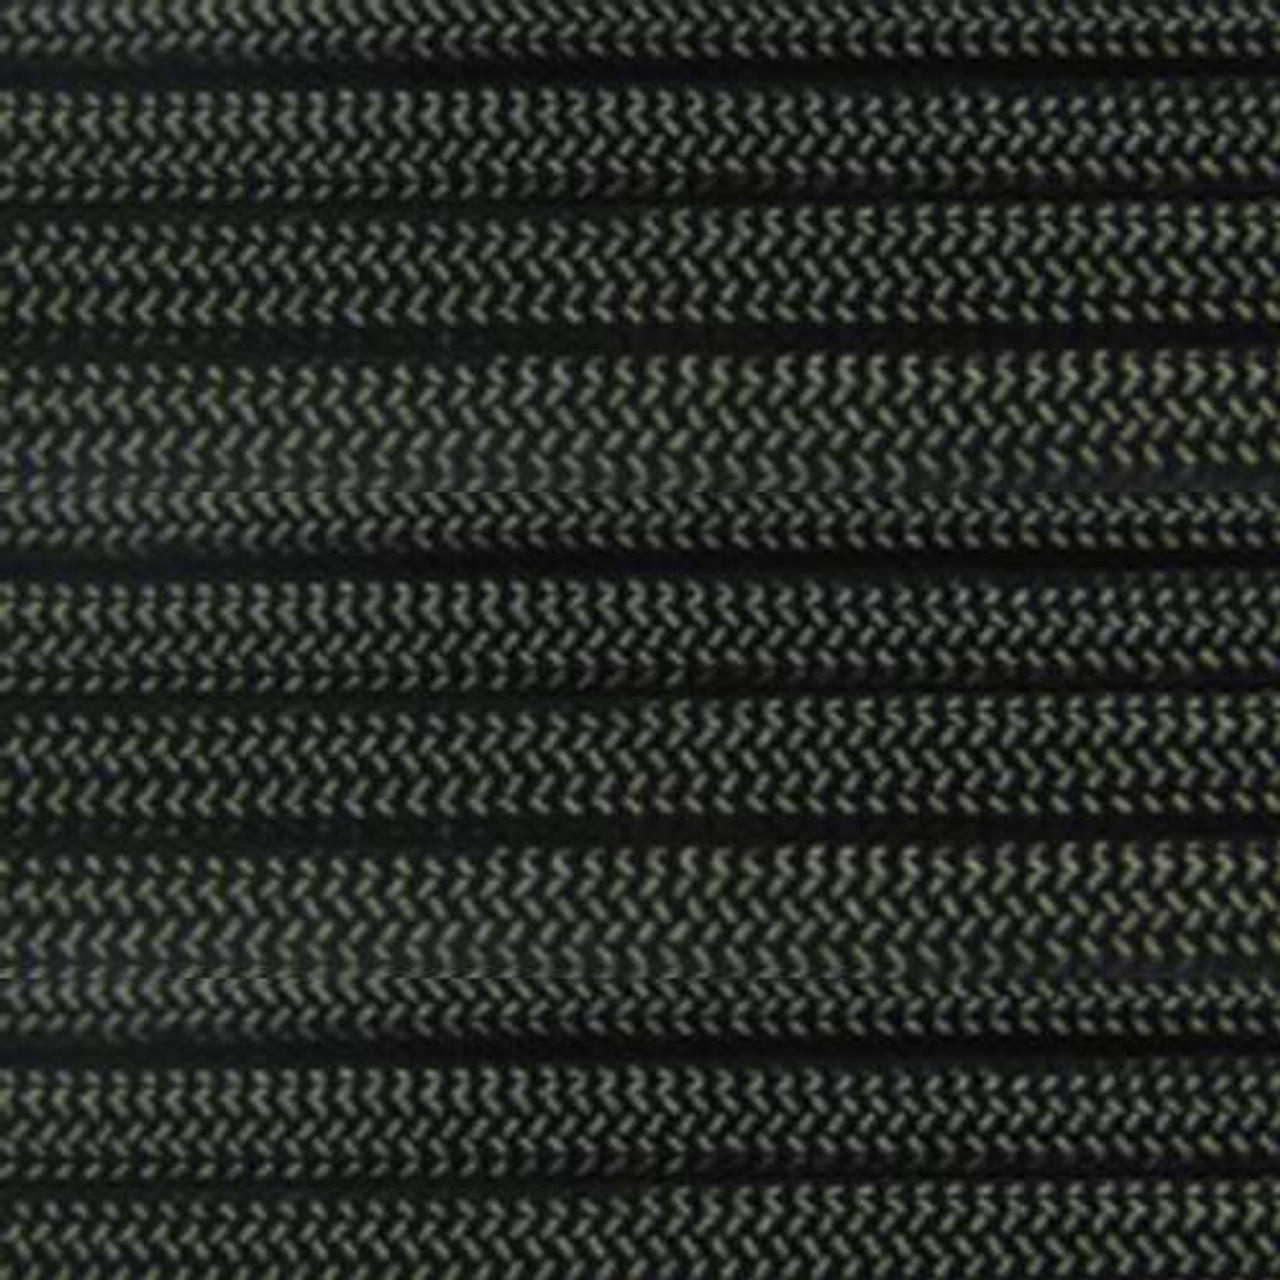 Olive Drab 550 Outdoor Cord Jute & Fishing